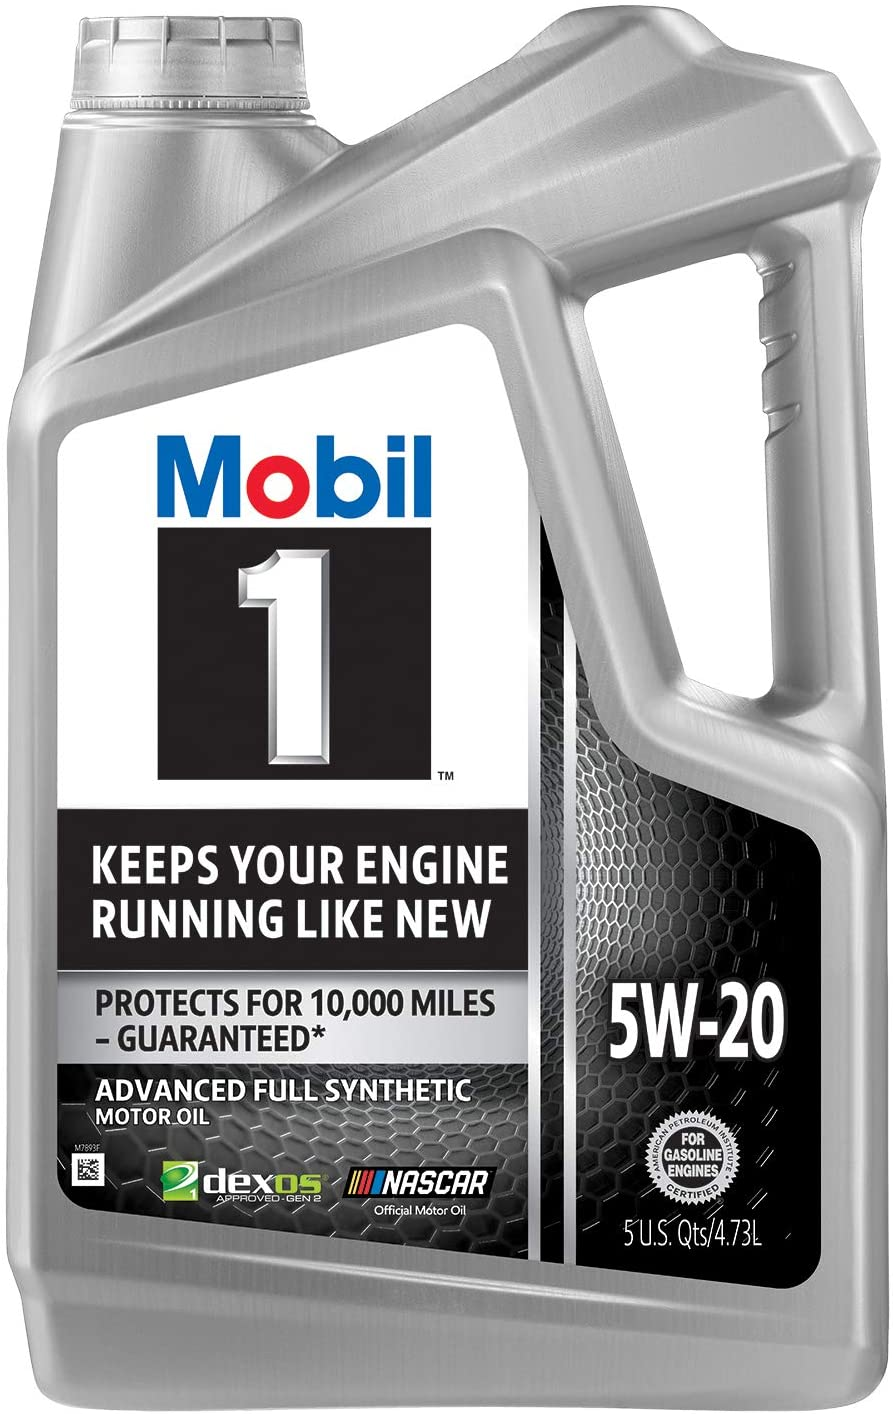 Mobil 5W-20 also helps extend the life of your engine, clean up sludge with its components, and help your engine run like it is always brand new.